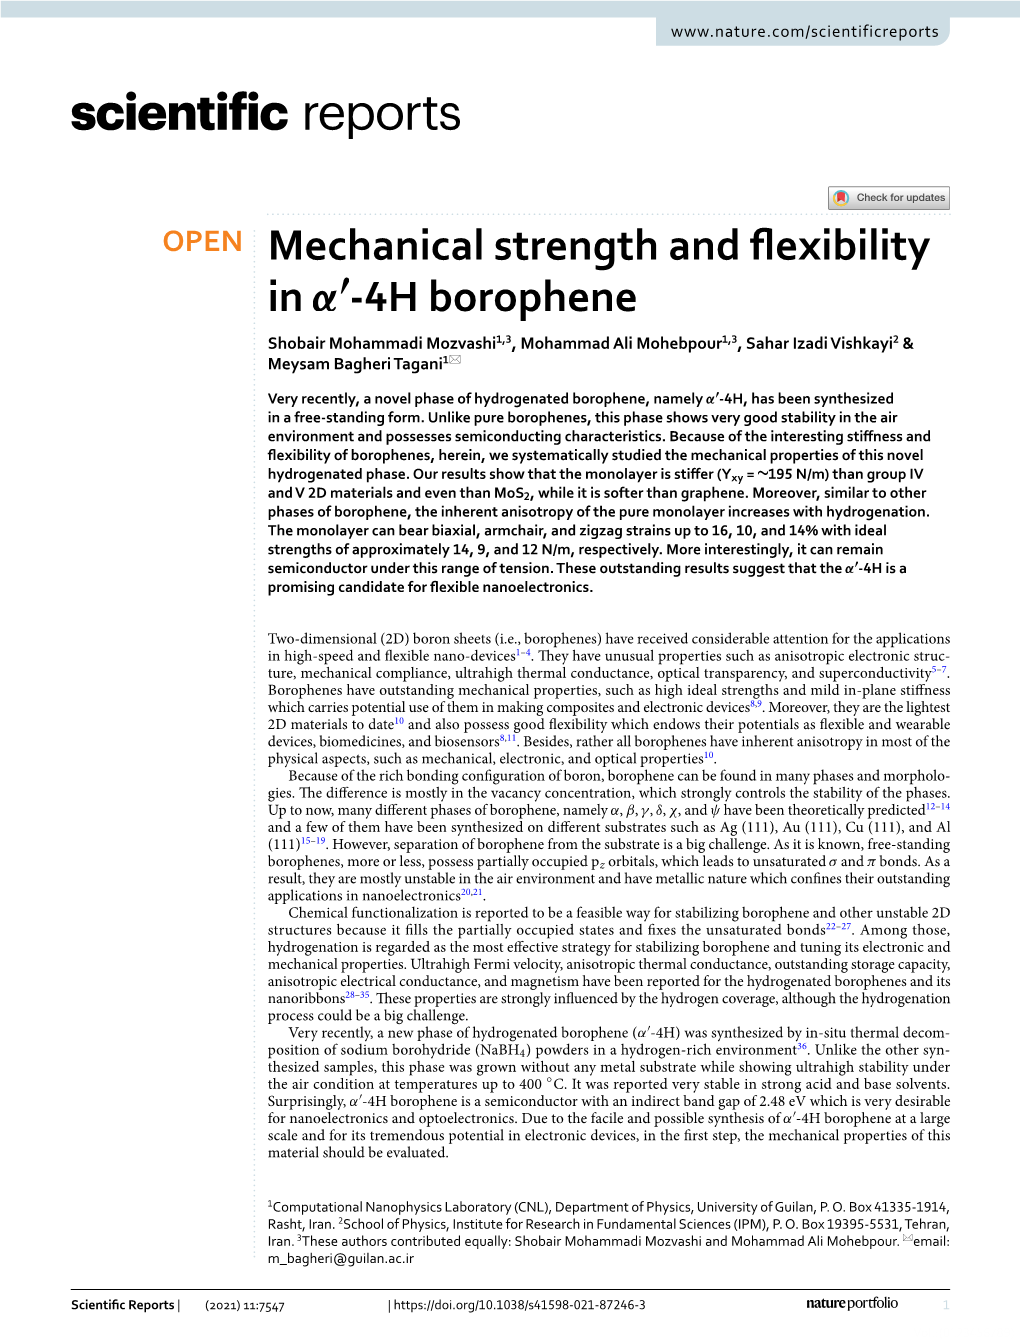 Mechanical Strength and Flexibility in -4H Borophene